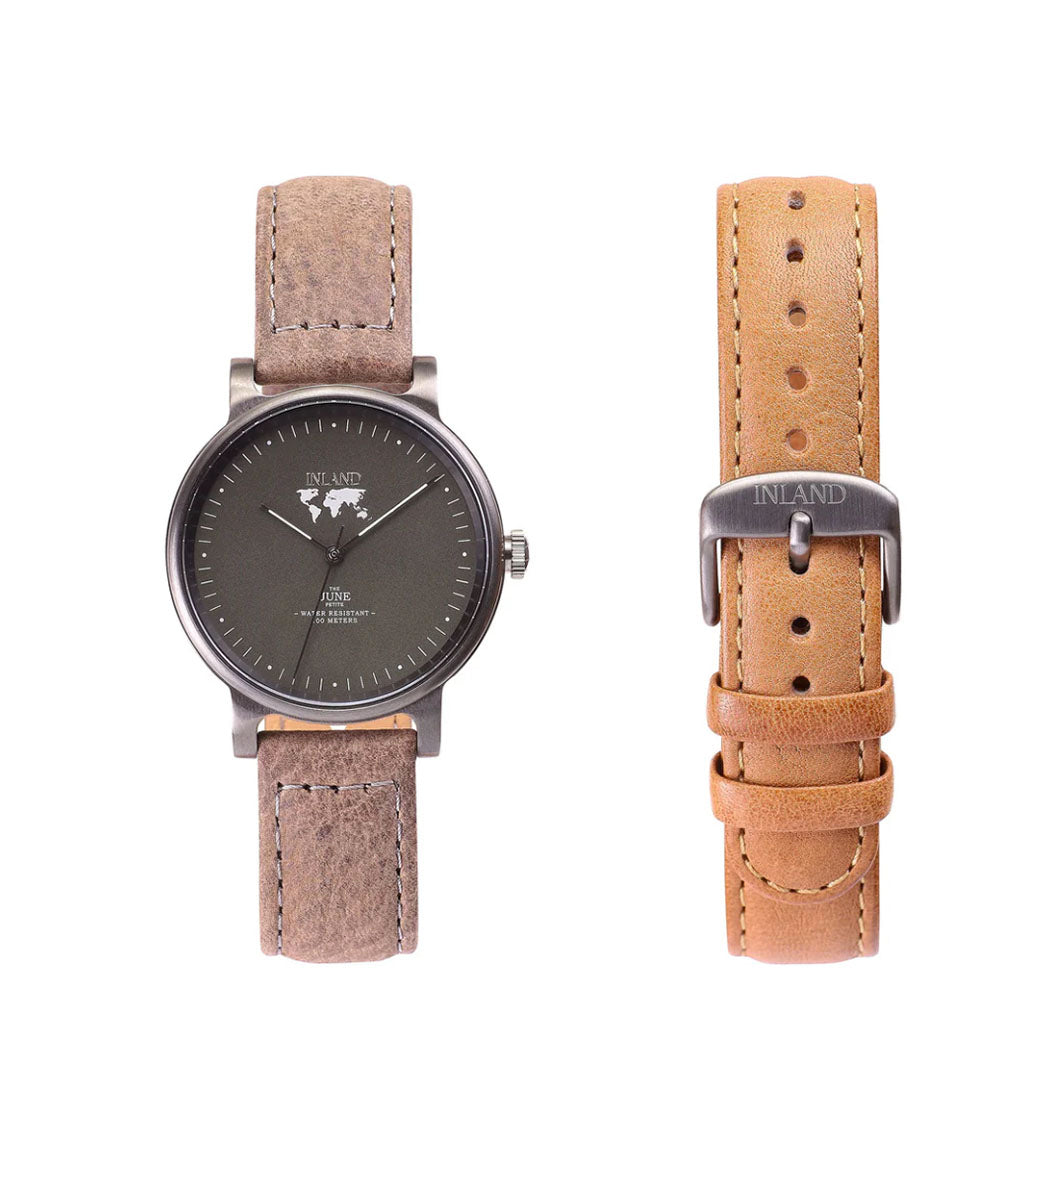 “THE JUNE PETITE” Watch – Charcoal / Olive Gray